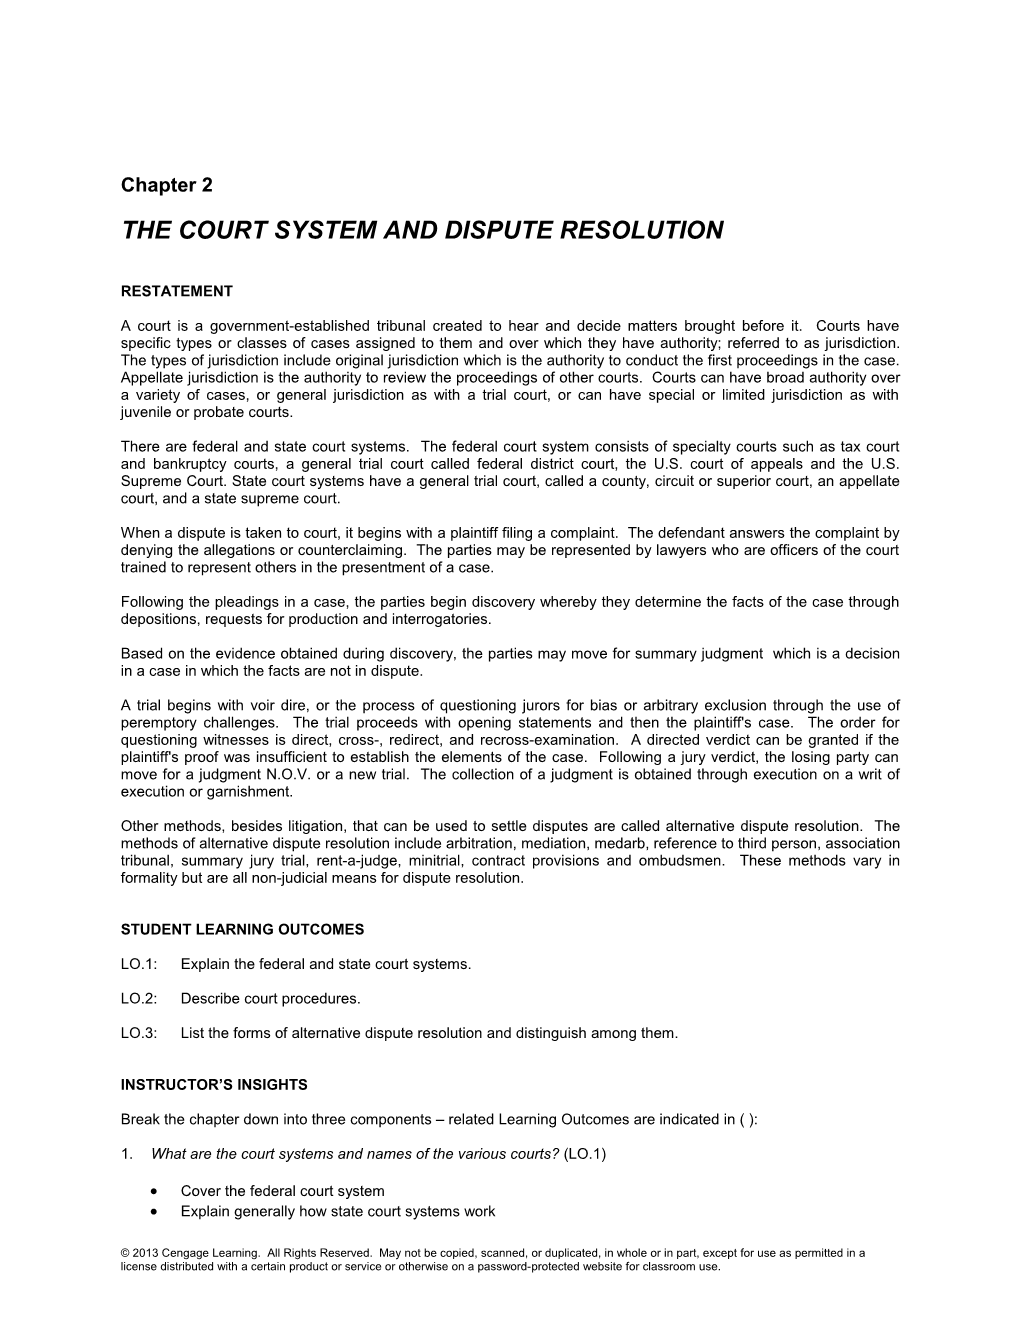 The Court System and Dispute Resolution1